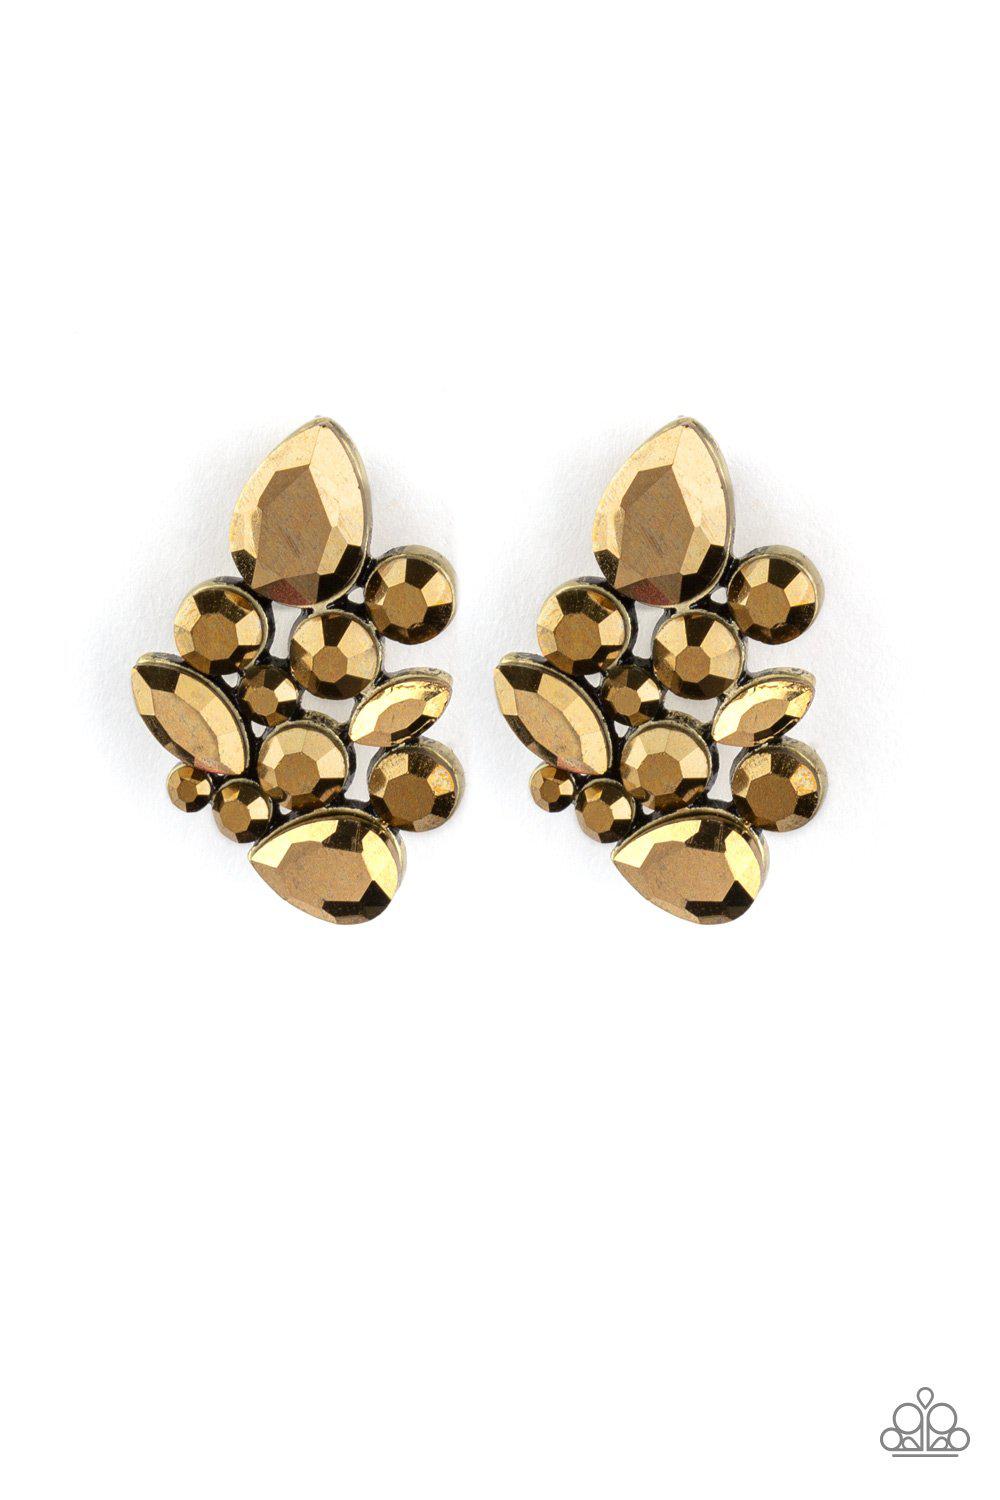 Galaxy Glimmer Brass Post Earrings - Paparazzi Accessories - lightbox -CarasShop.com - $5 Jewelry by Cara Jewels